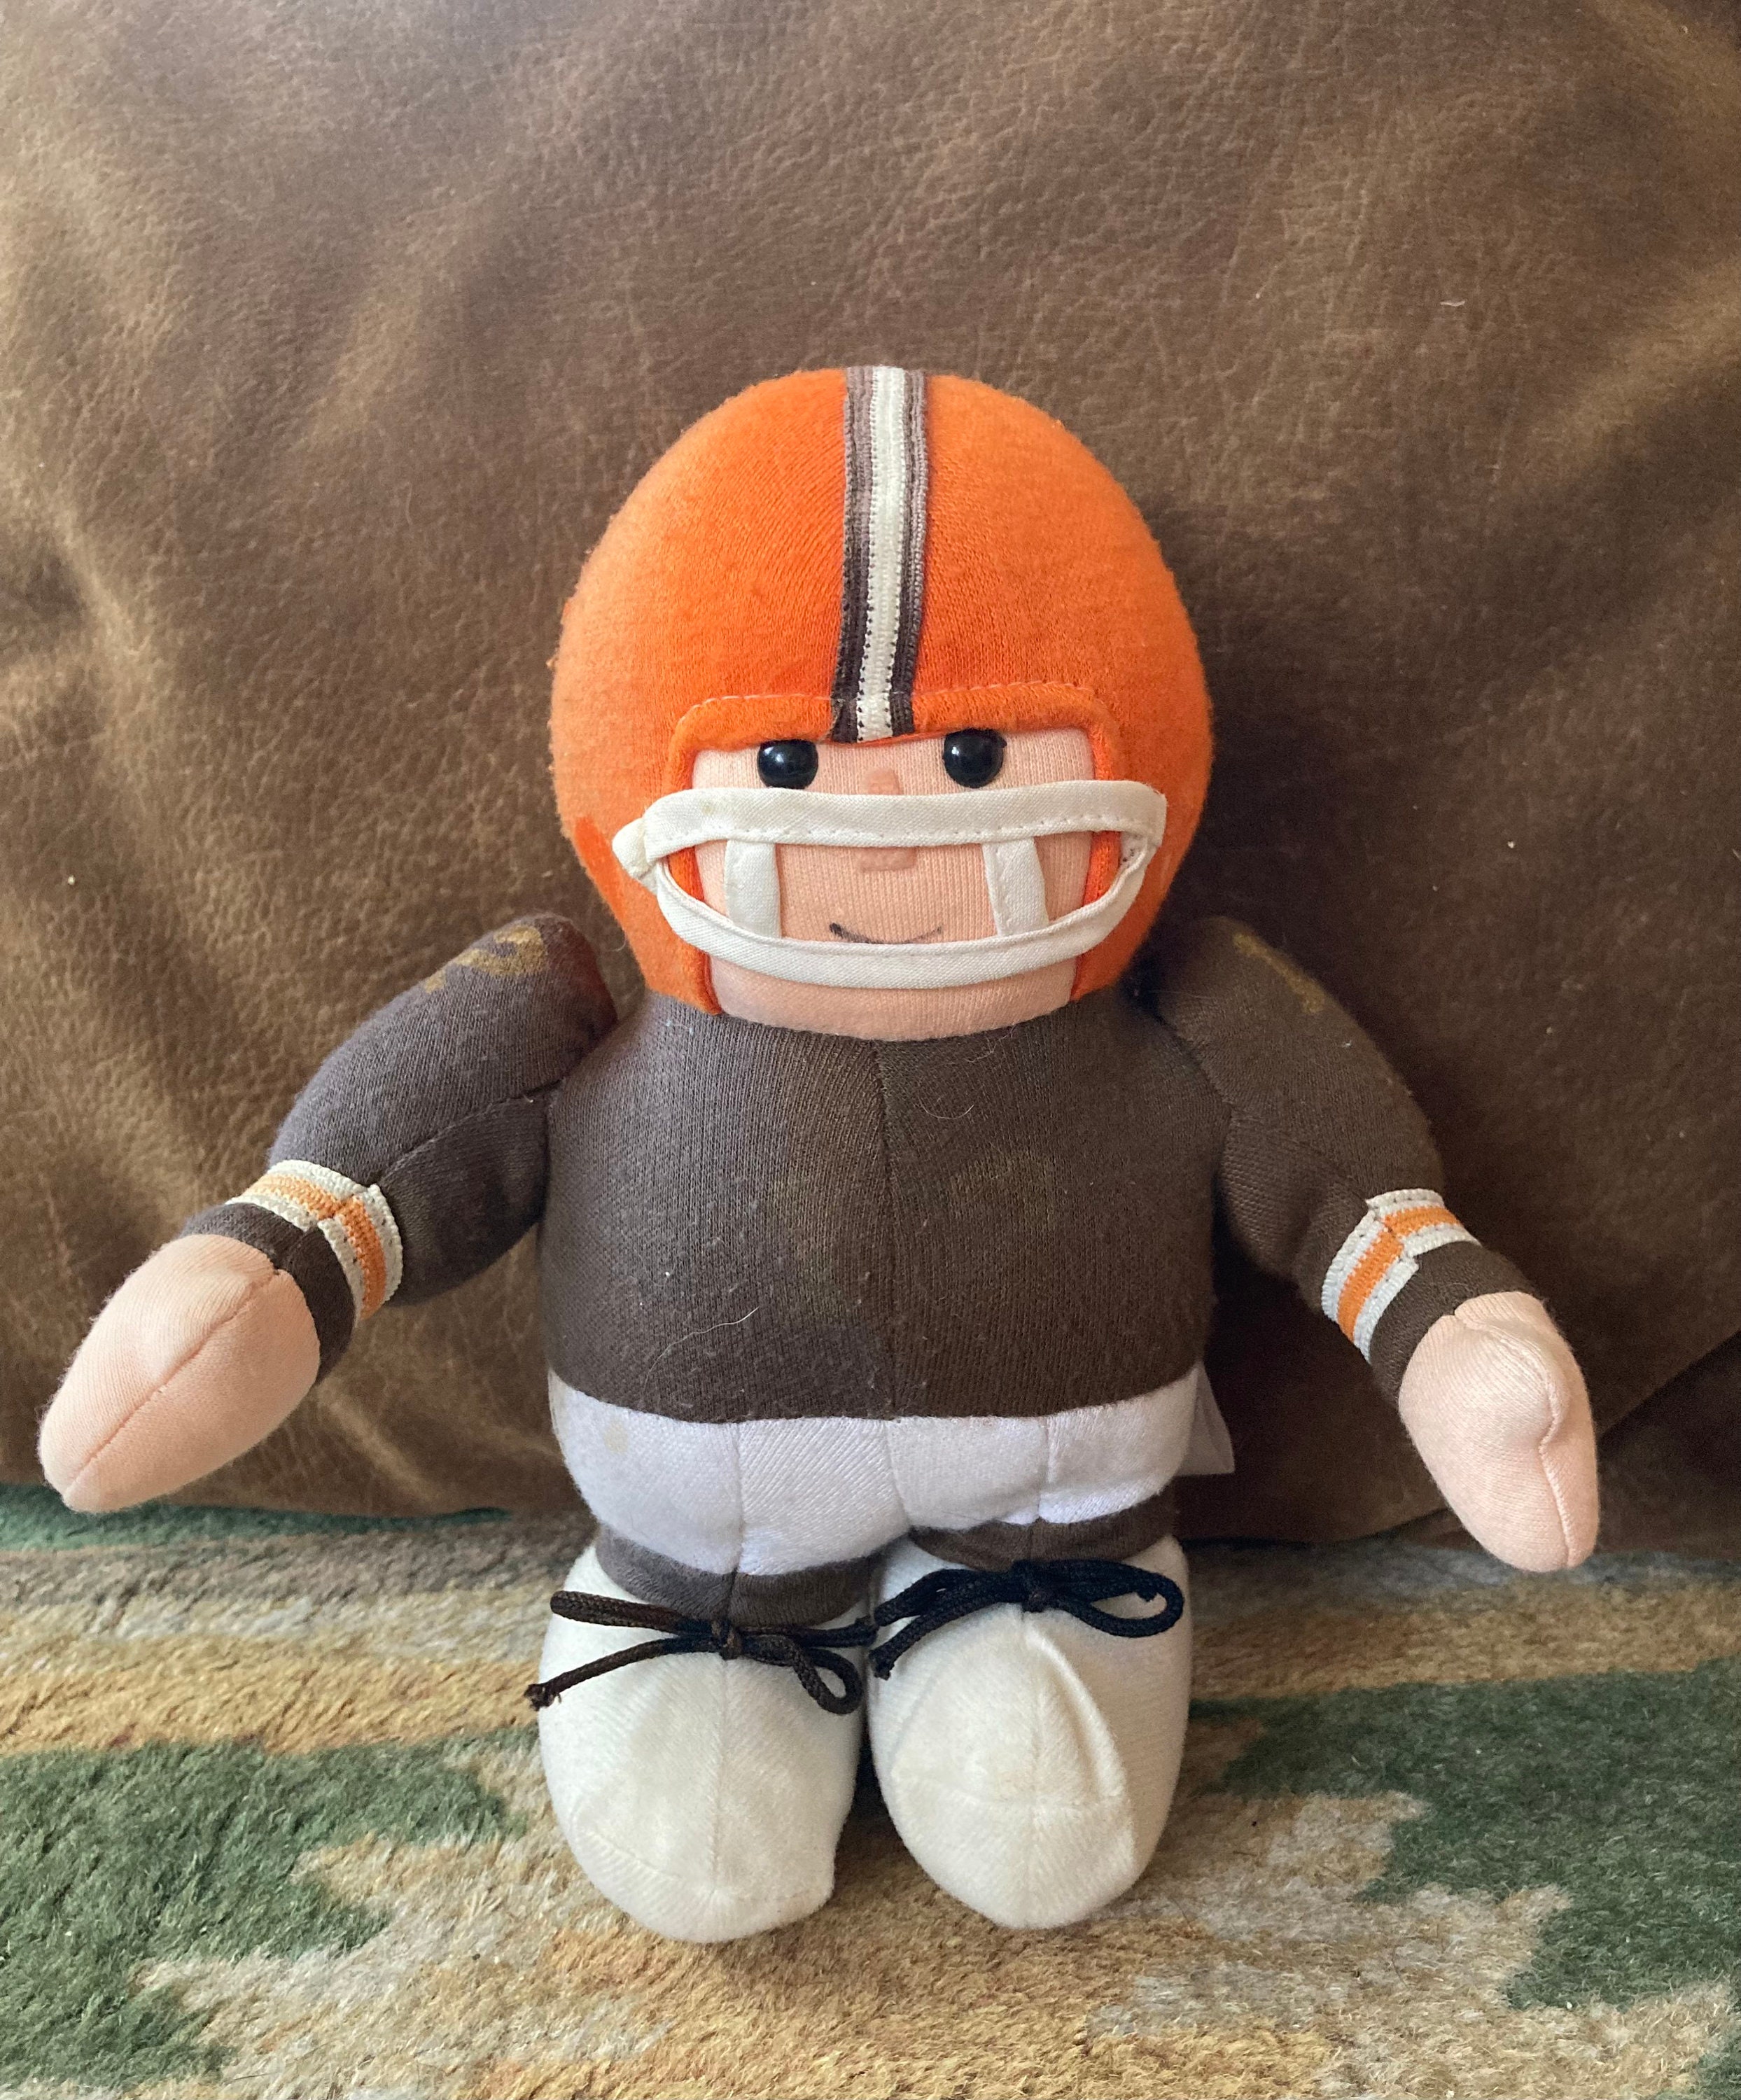 Dammit Doll of Cleveland Browns 